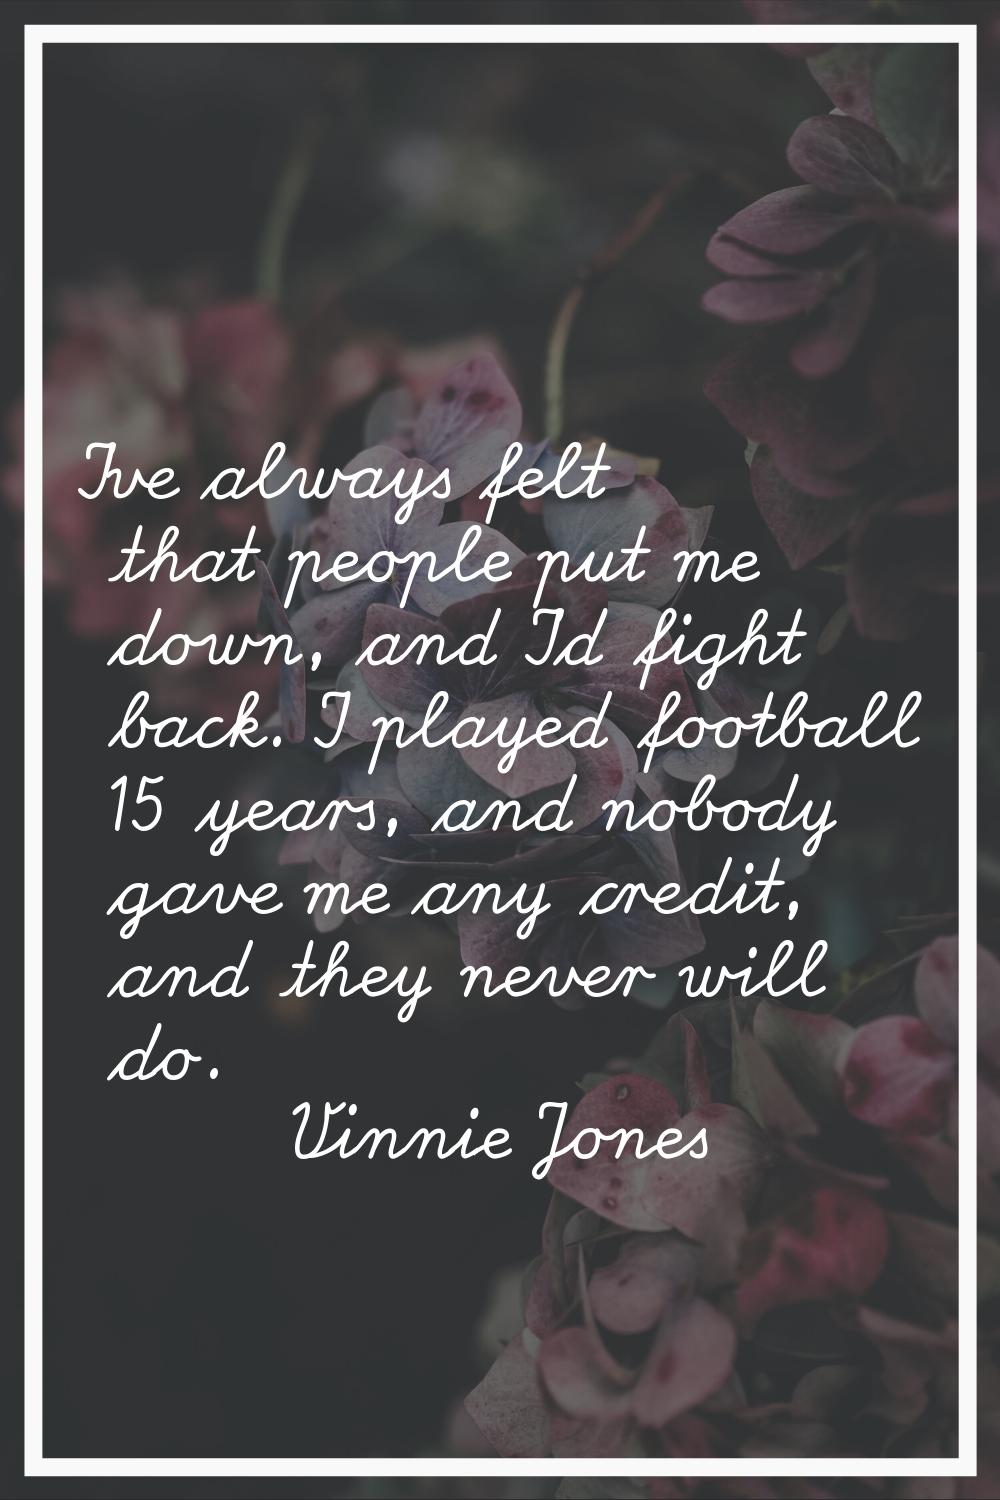 I've always felt that people put me down, and I'd fight back. I played football 15 years, and nobod